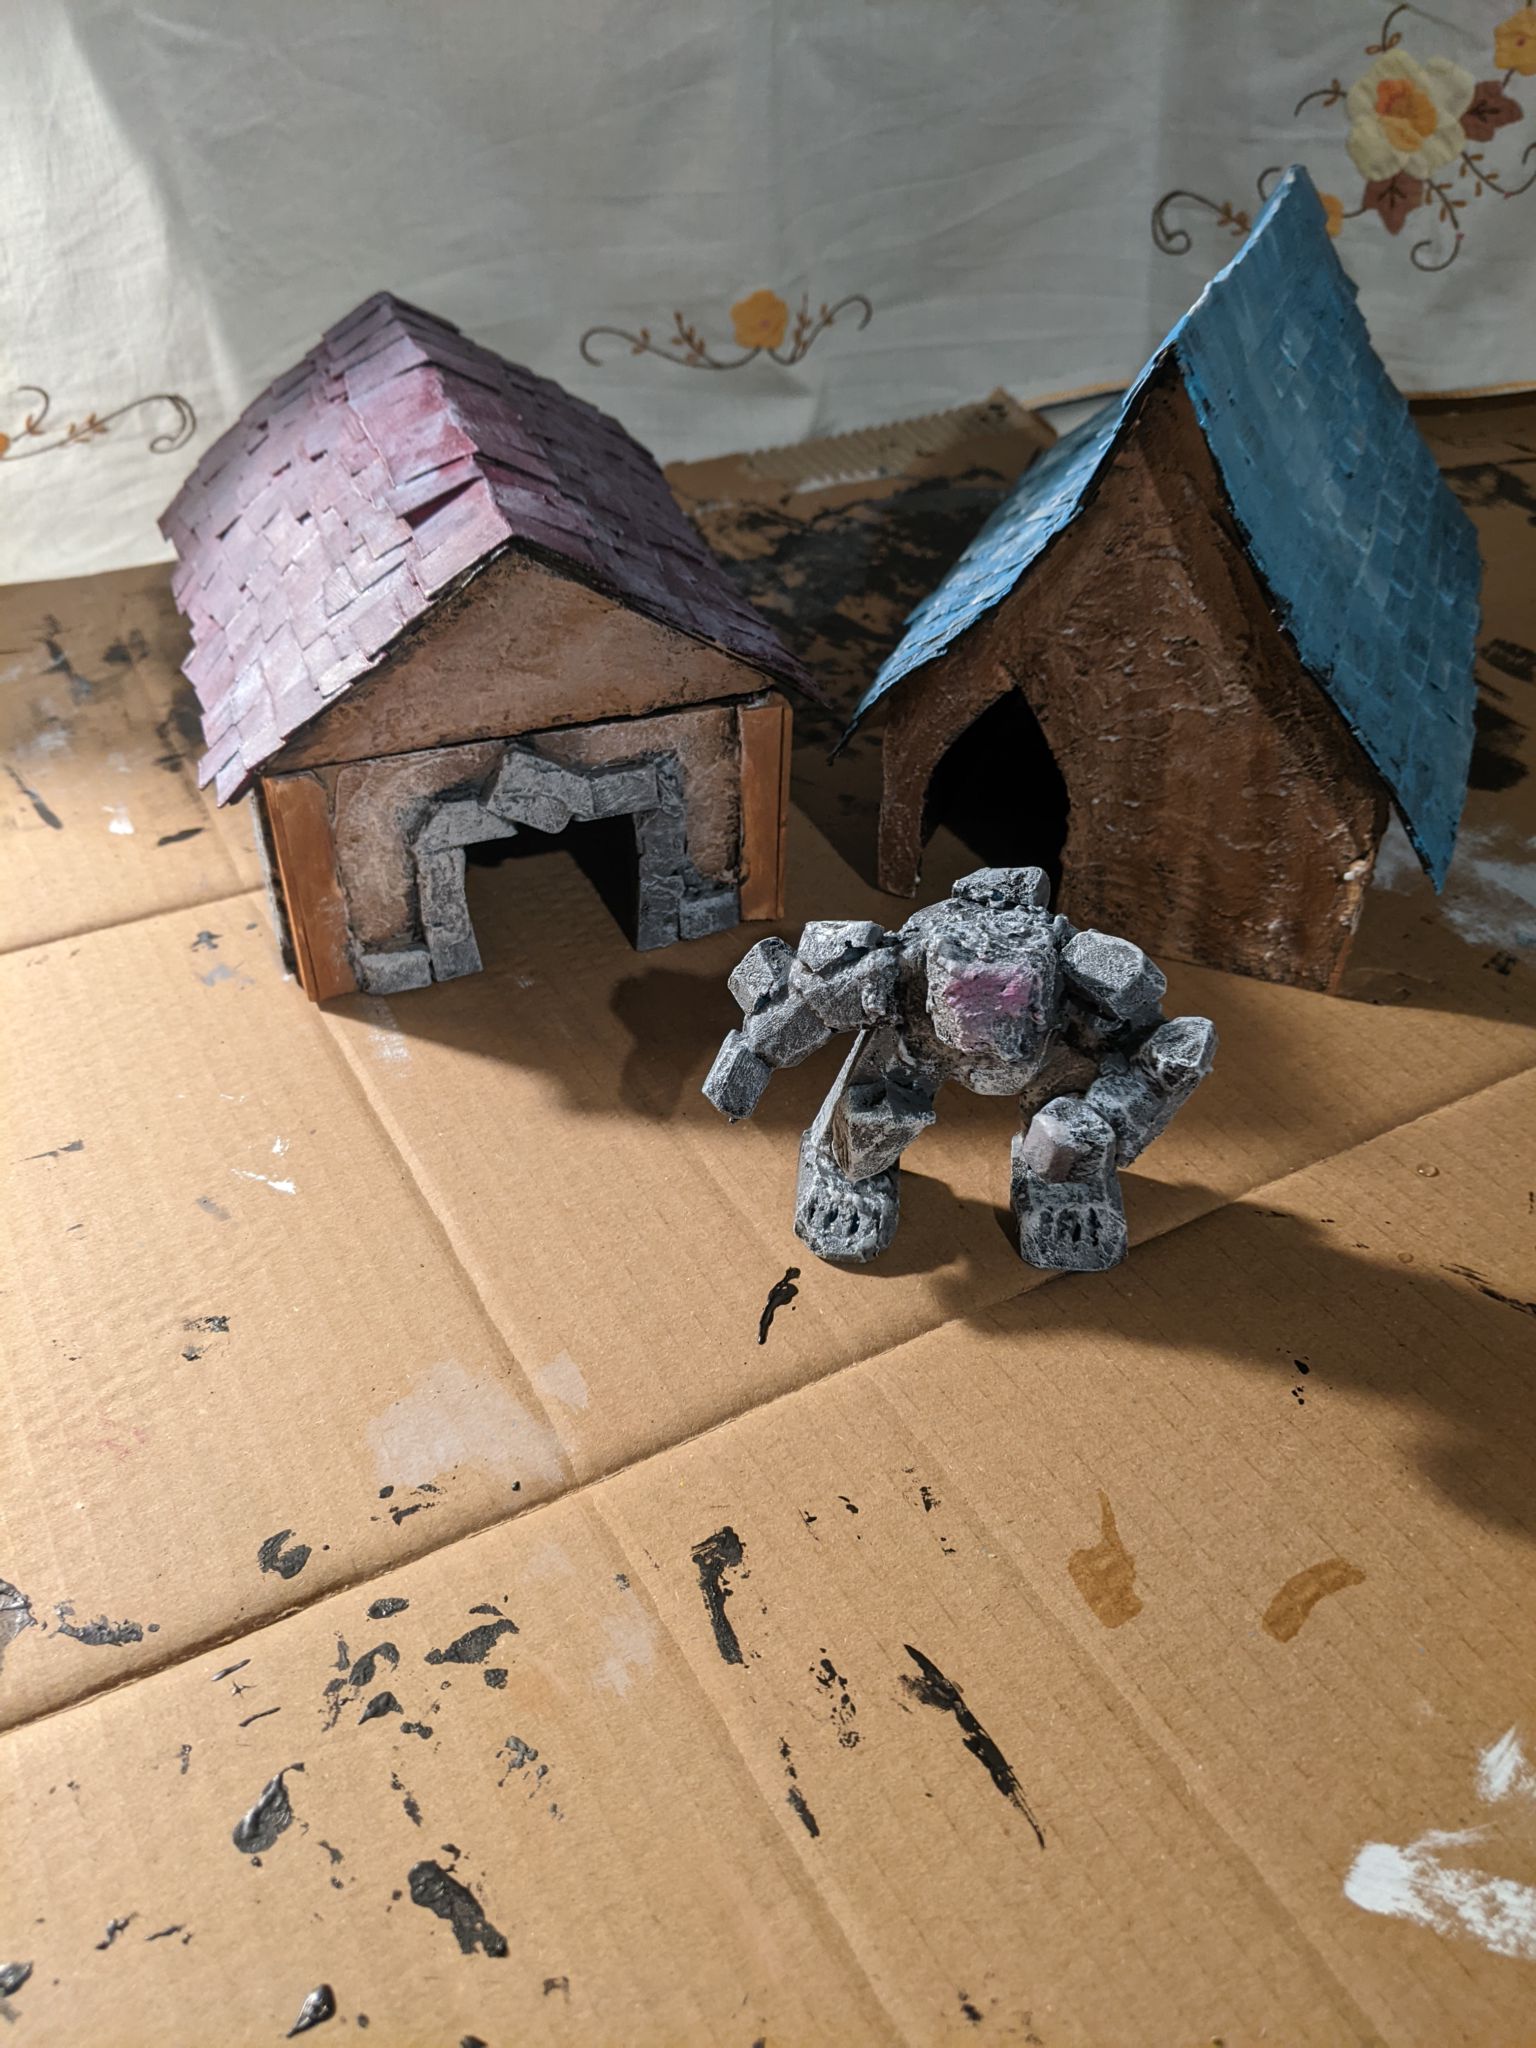 A picture of two painted miniature houses for a TTRPG. In front of them is a self made stone golem consisting of painted XPS foam.